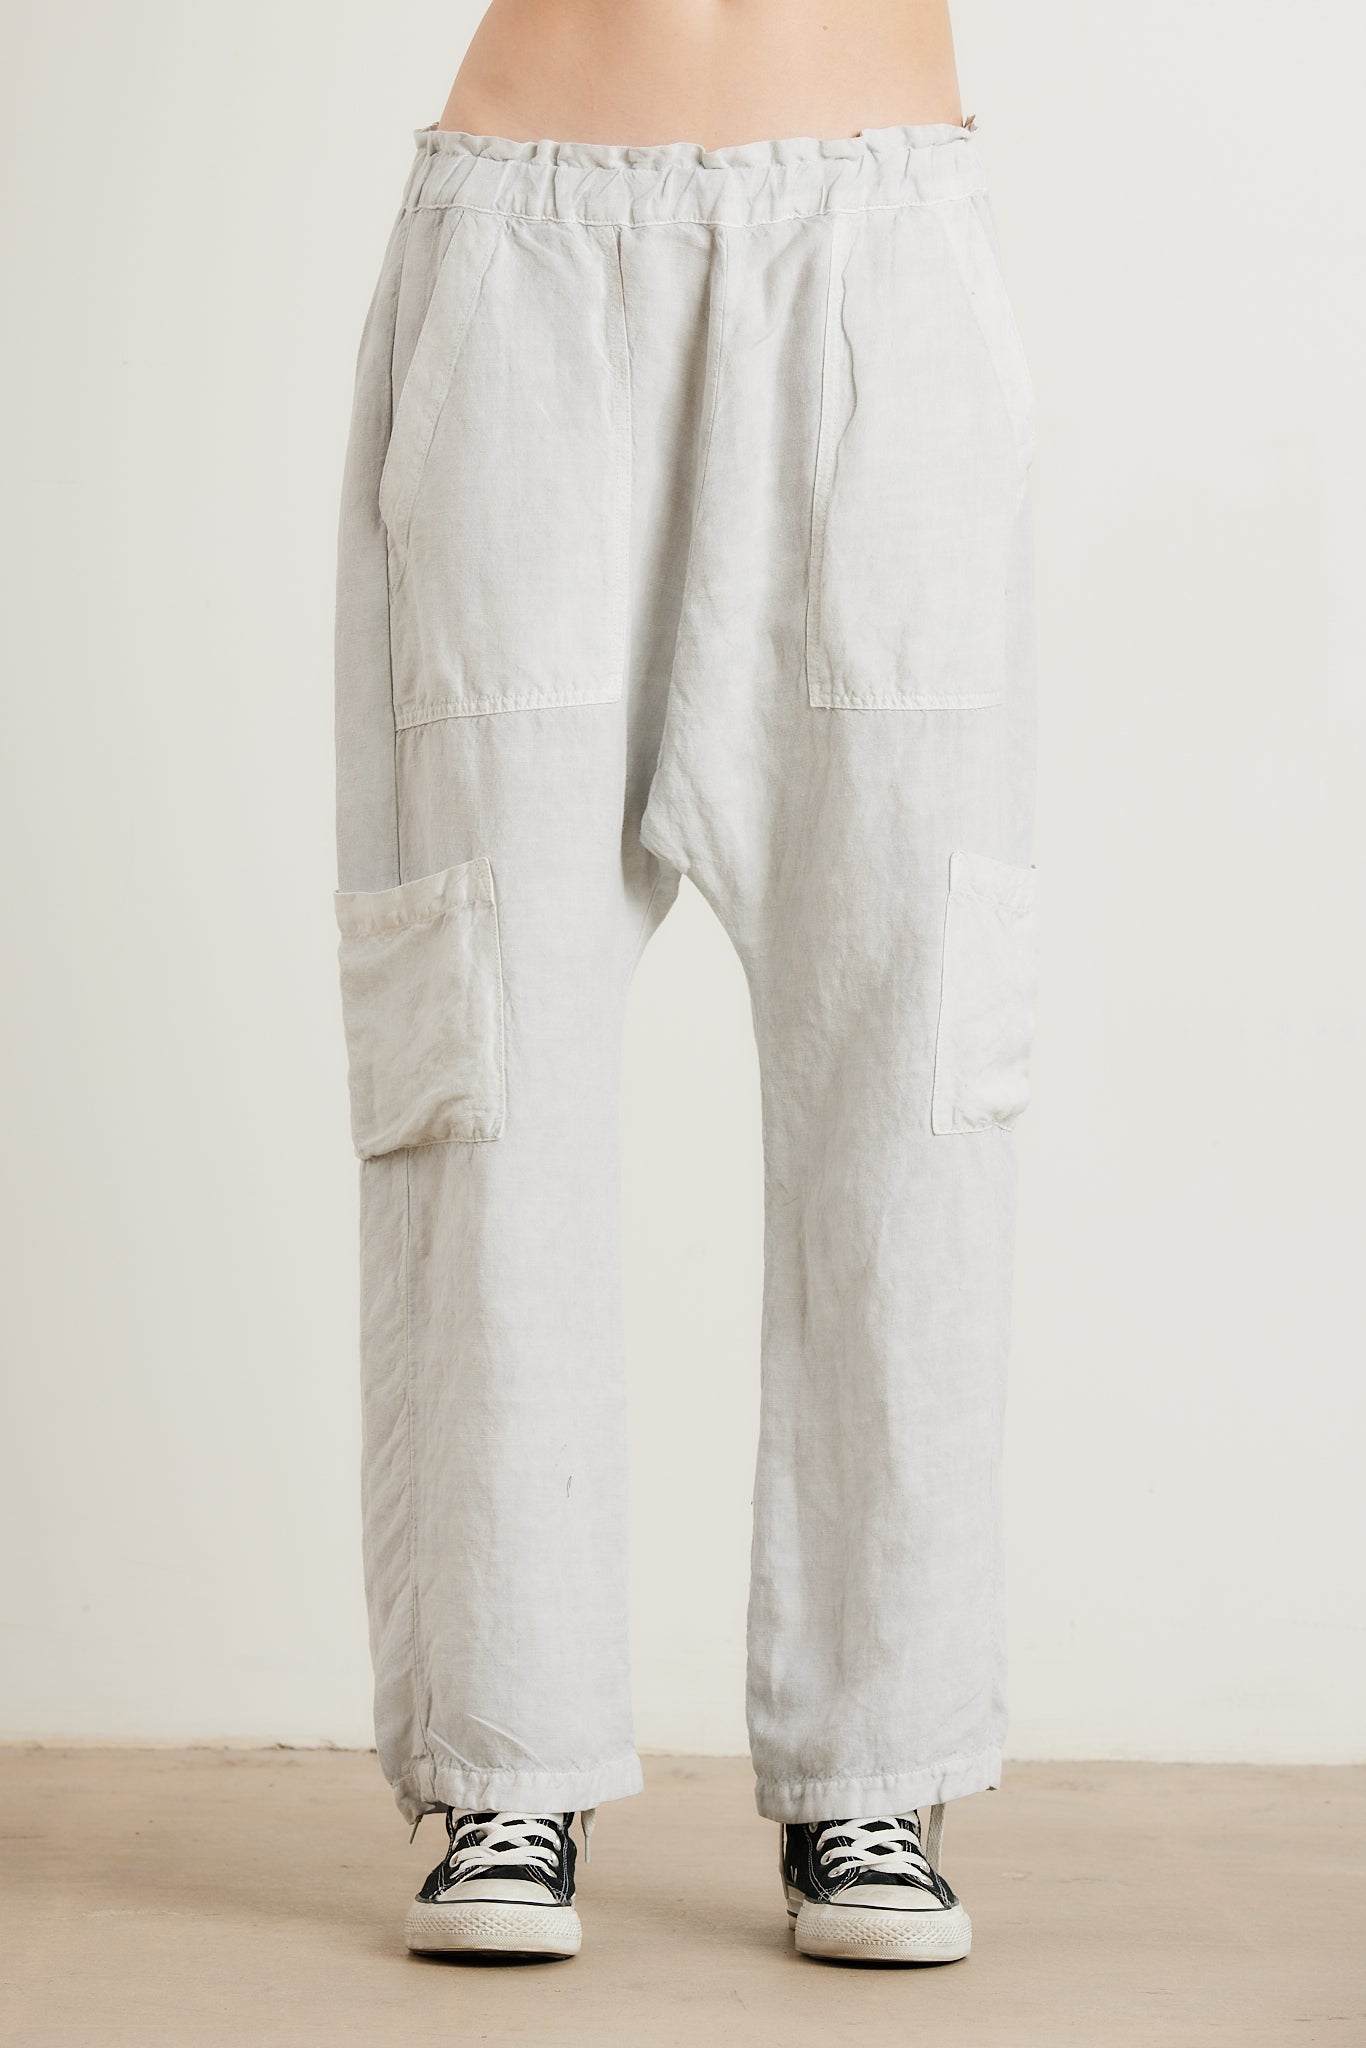 SHAILEY PANT/ PIGMENT SHELL GREY